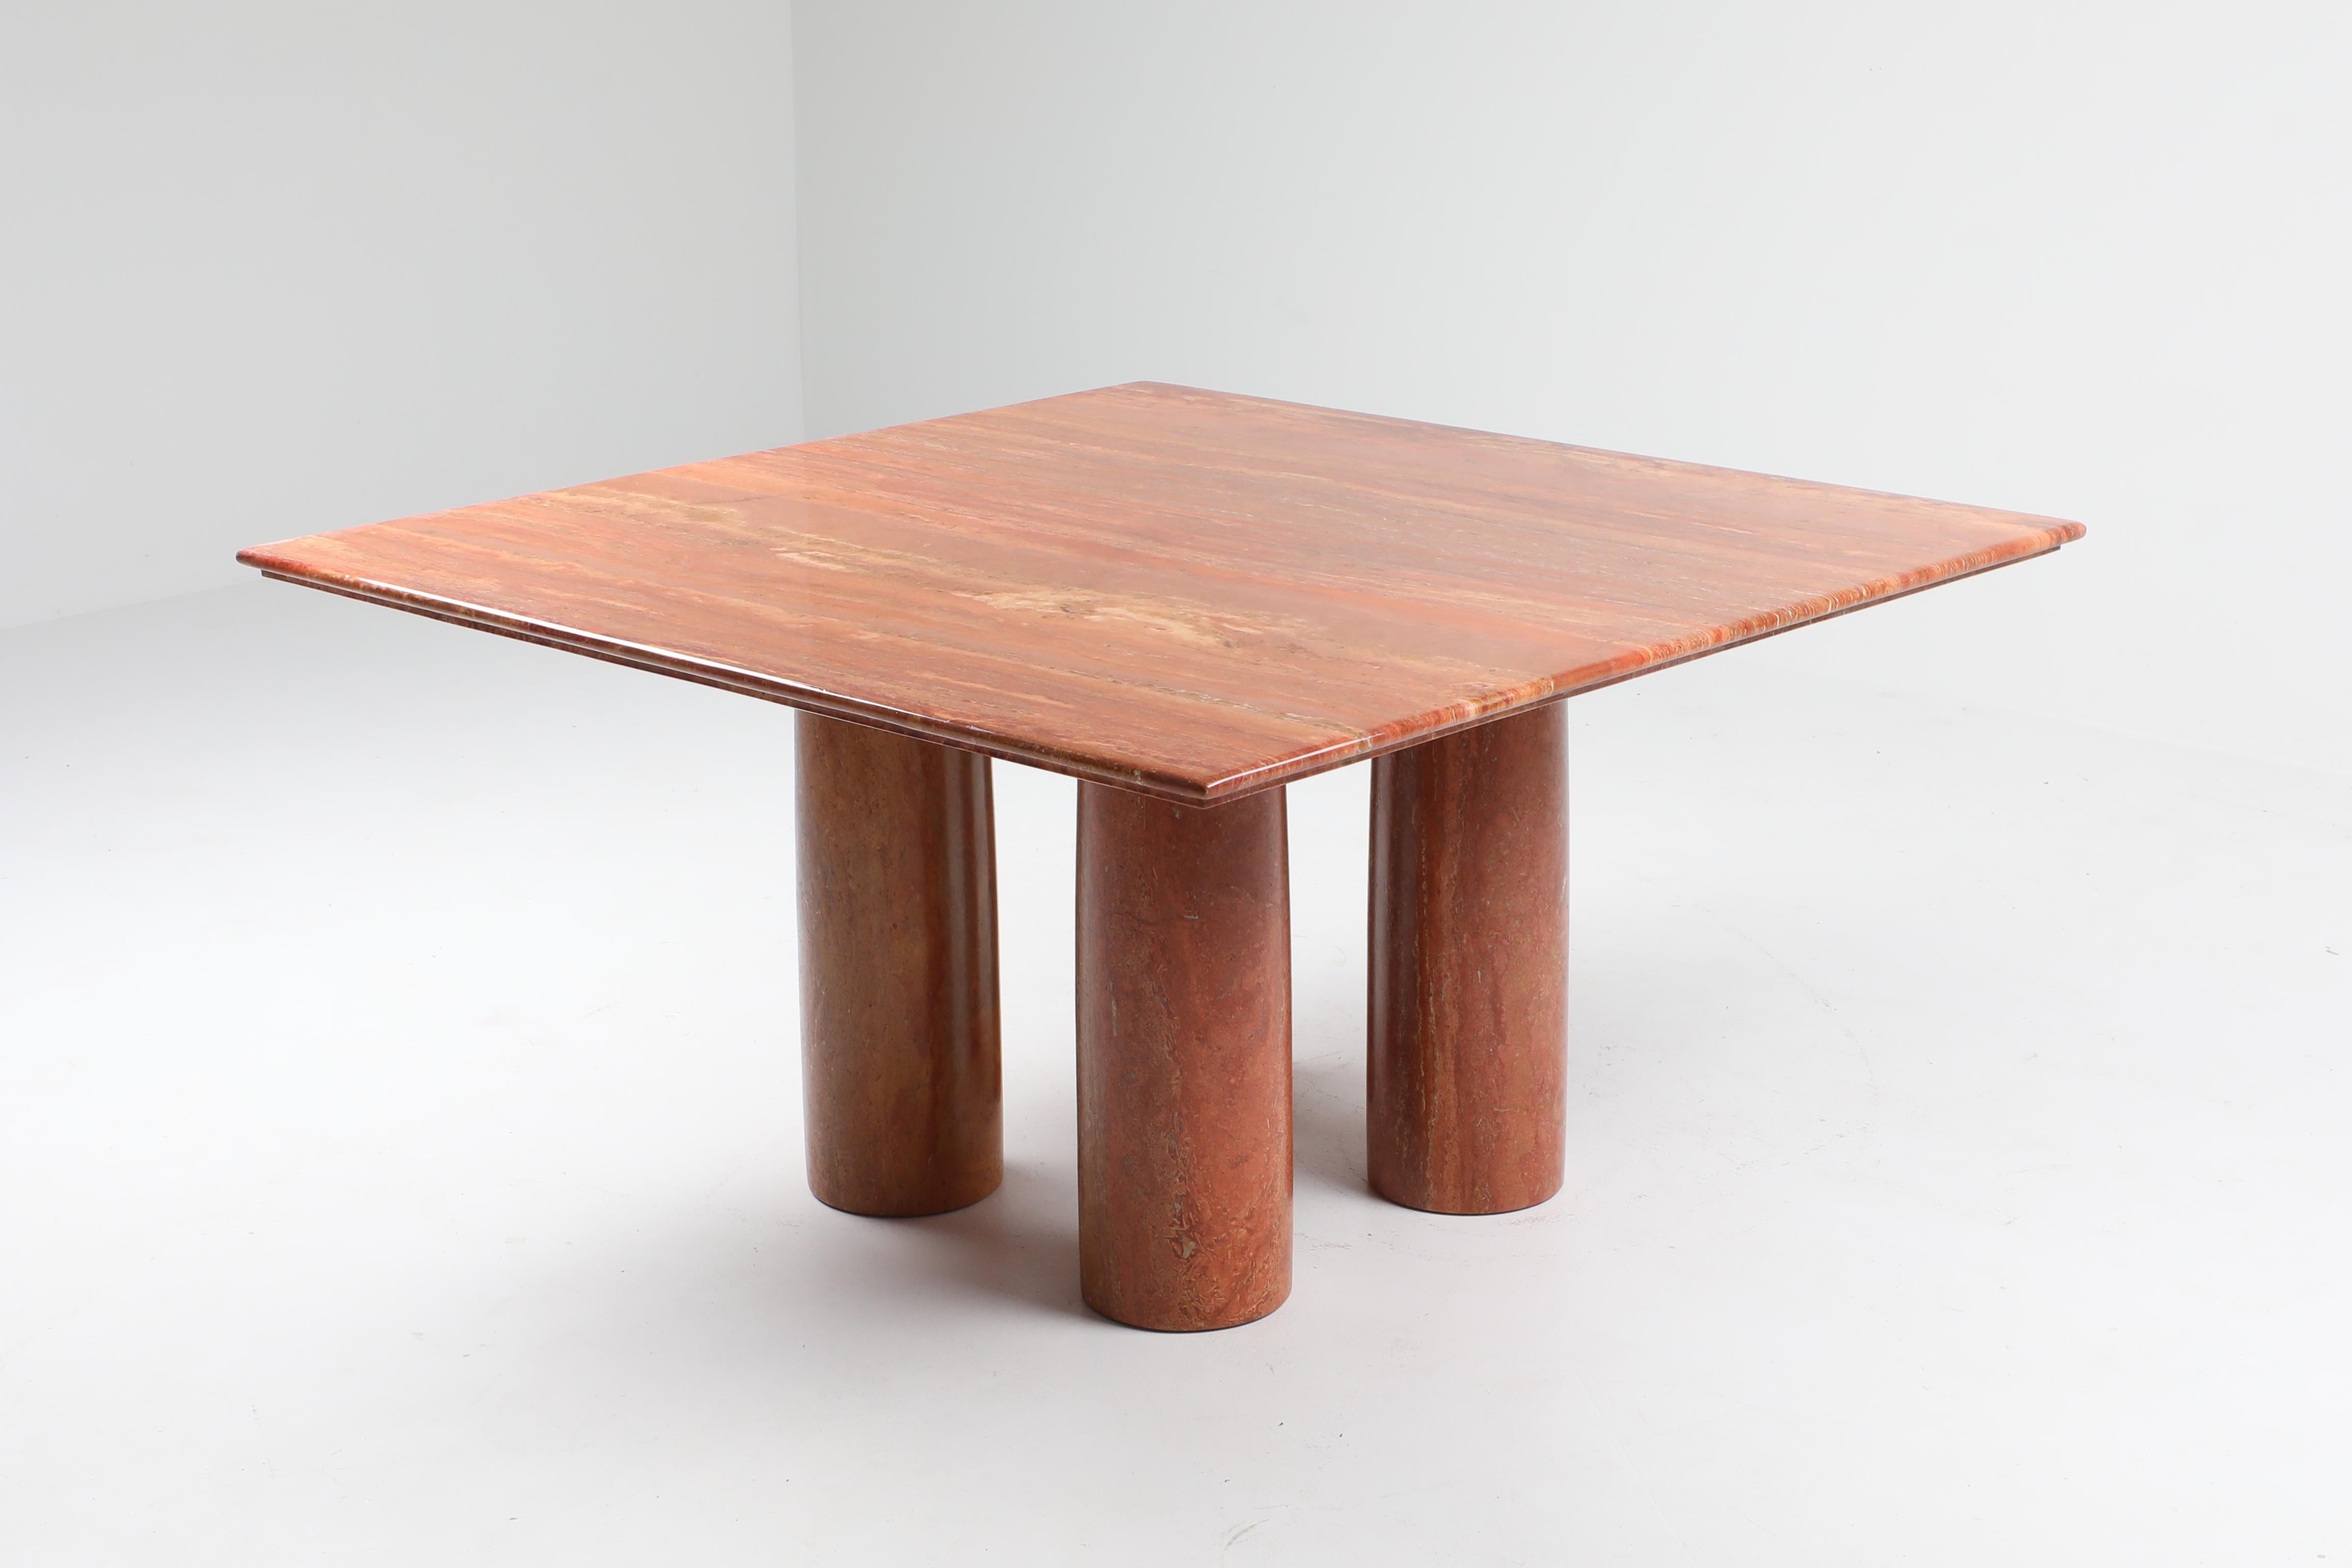 Mario Bellini, Cassina, Italy, 1970s.

Mario Bellini 'Il Colonato' table, red travertine, Italy, 1970s.

For this series of tables, Bellini was inspired by ancient Roman columns. This table consists of four cylindrical legs and this model